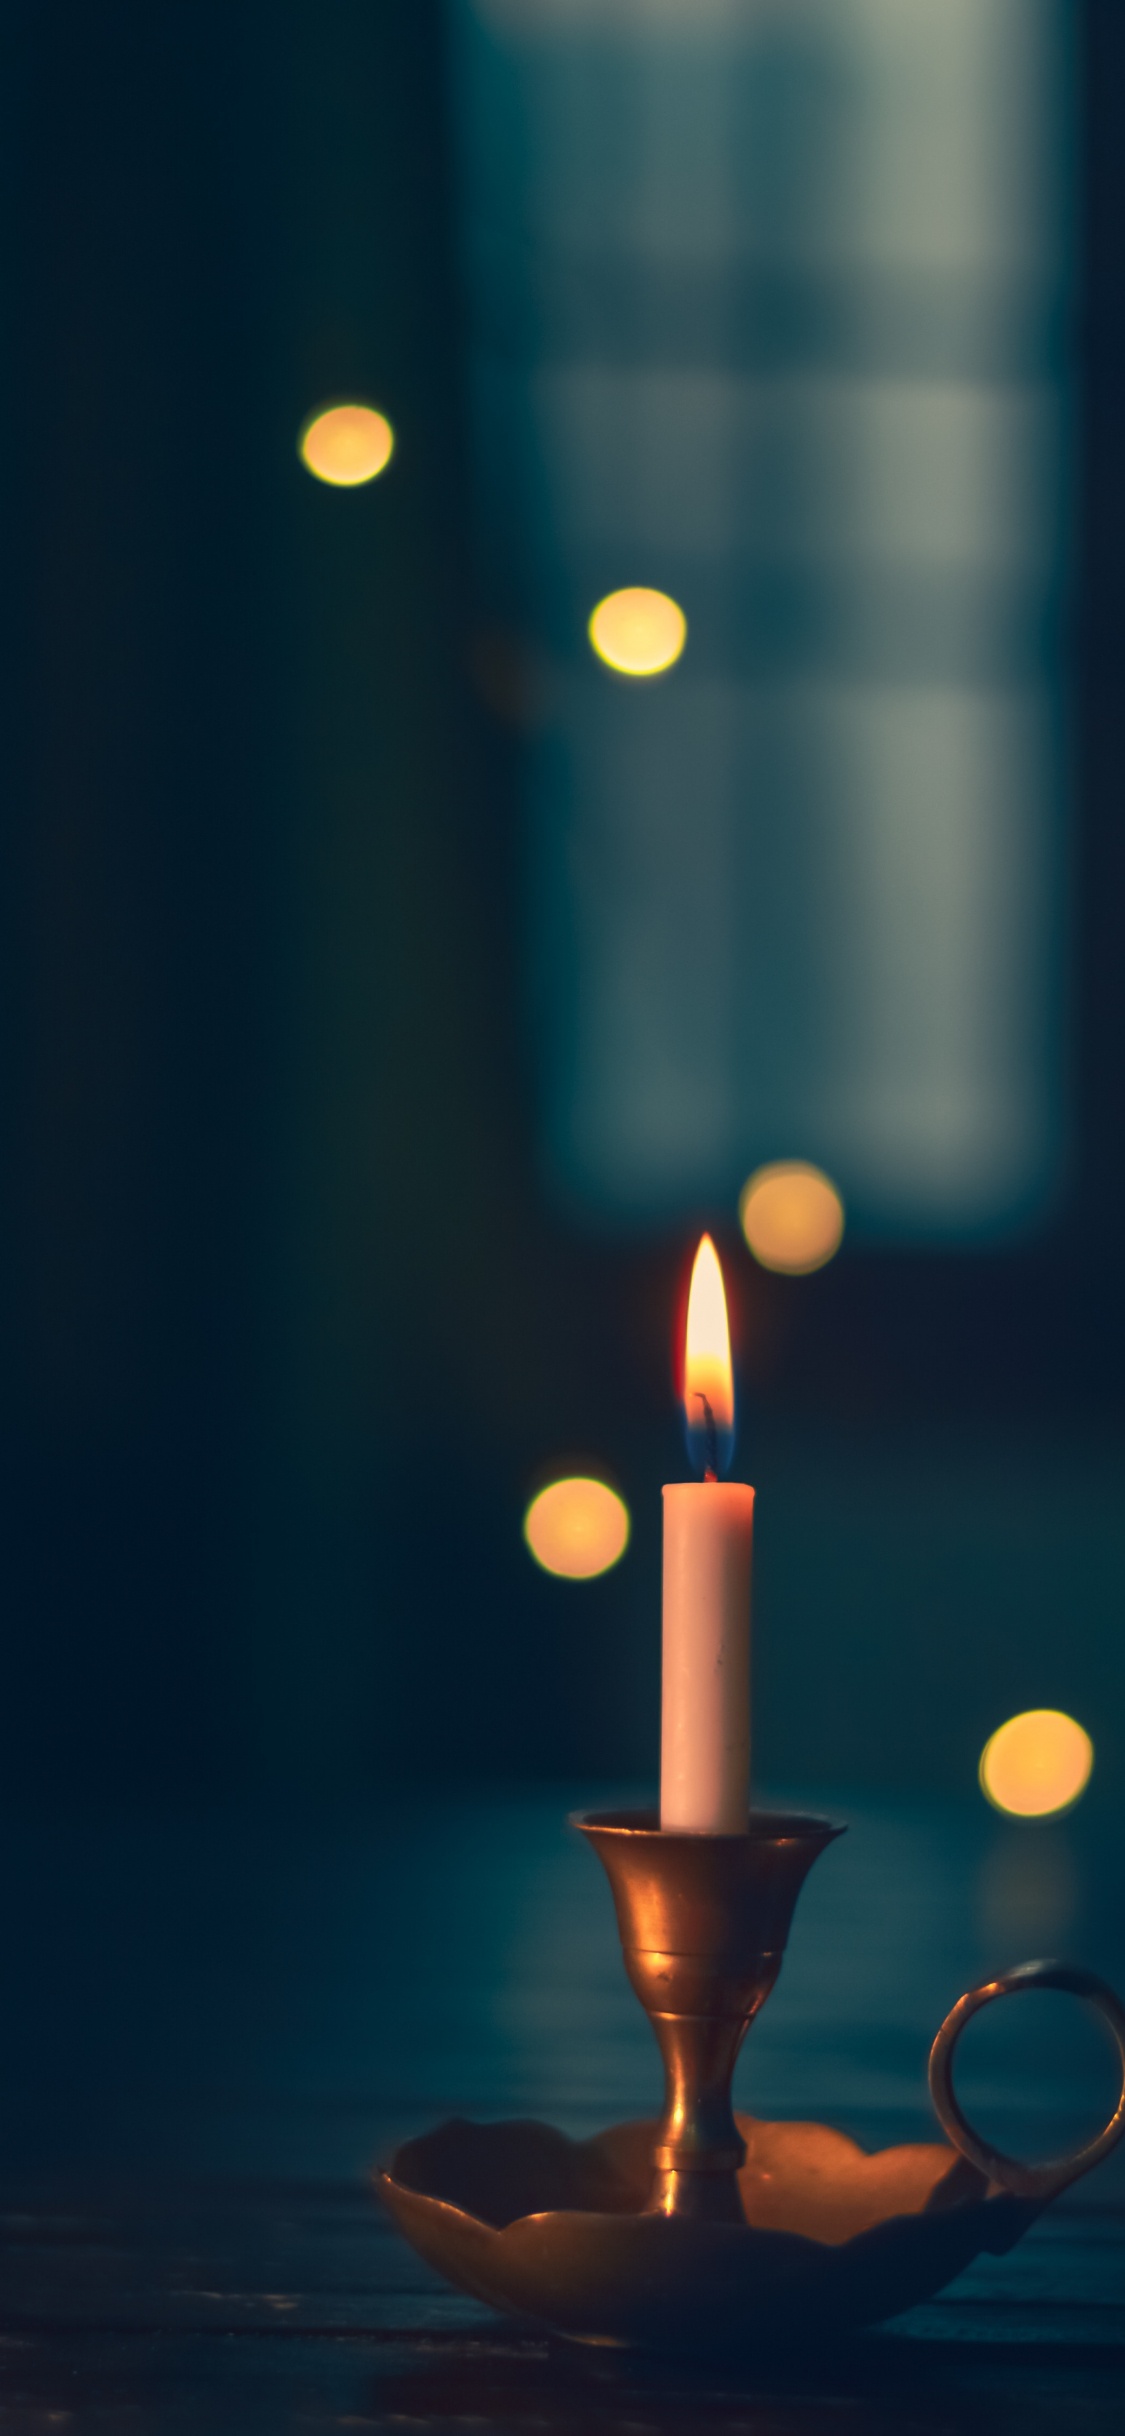 Lighted Candle in Black Holder. Wallpaper in 1125x2436 Resolution